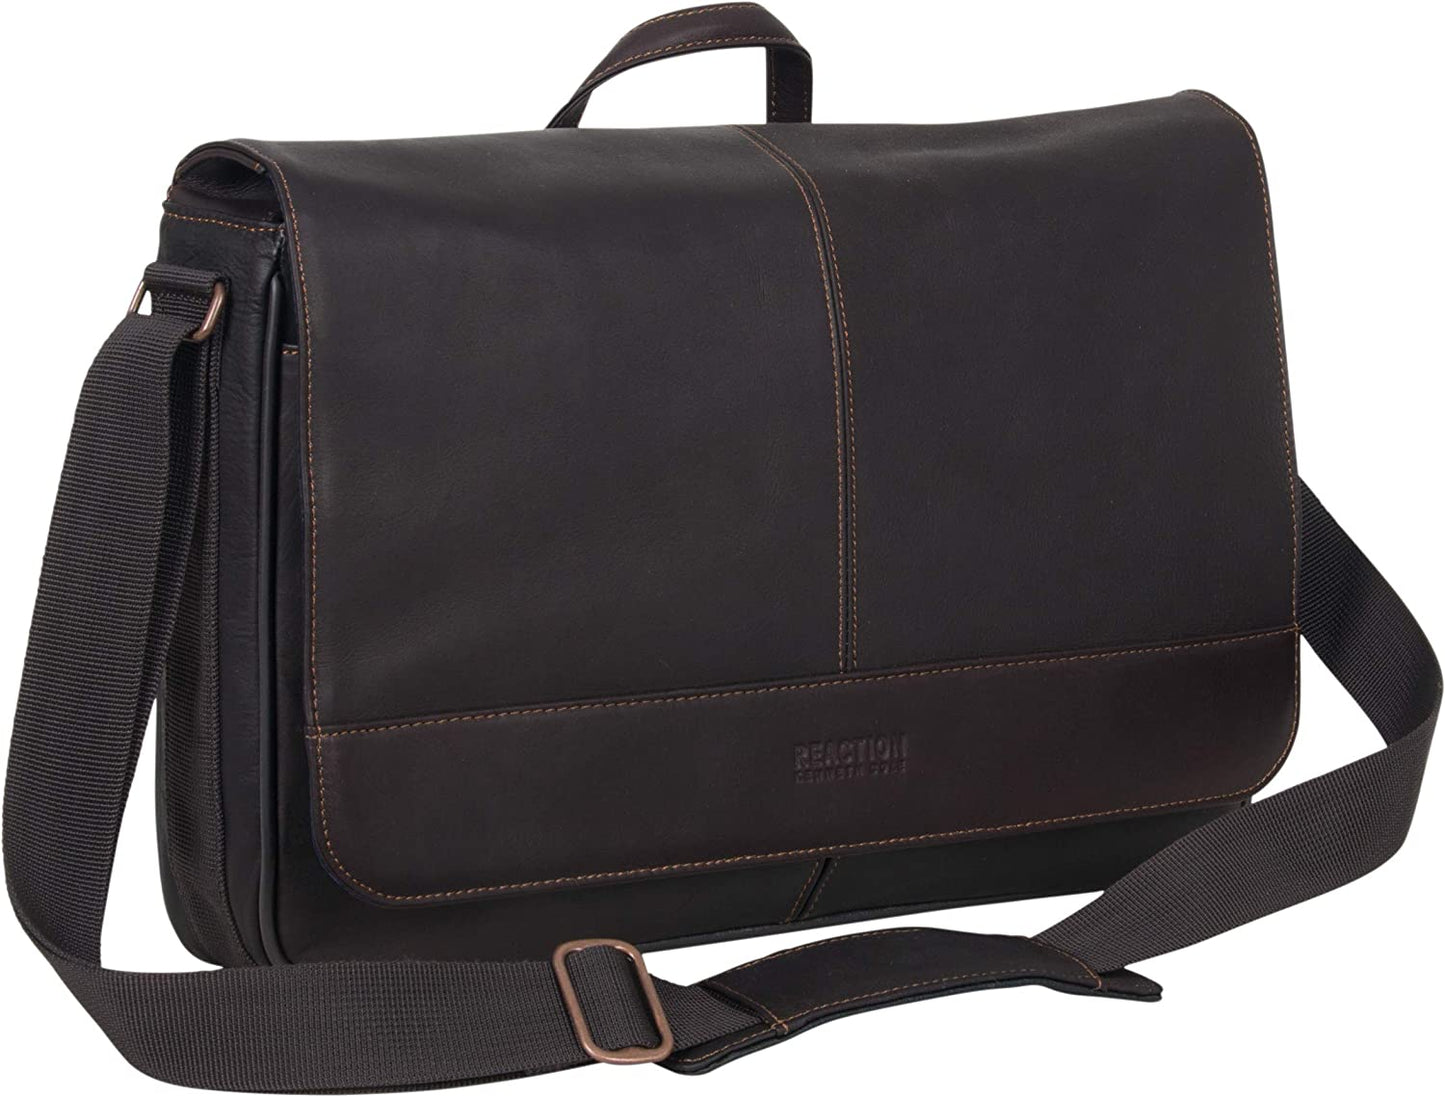 Kenneth Cole Reaction Come Bag Soon - Colombian Leather Laptop & iPad Messenger, Brown